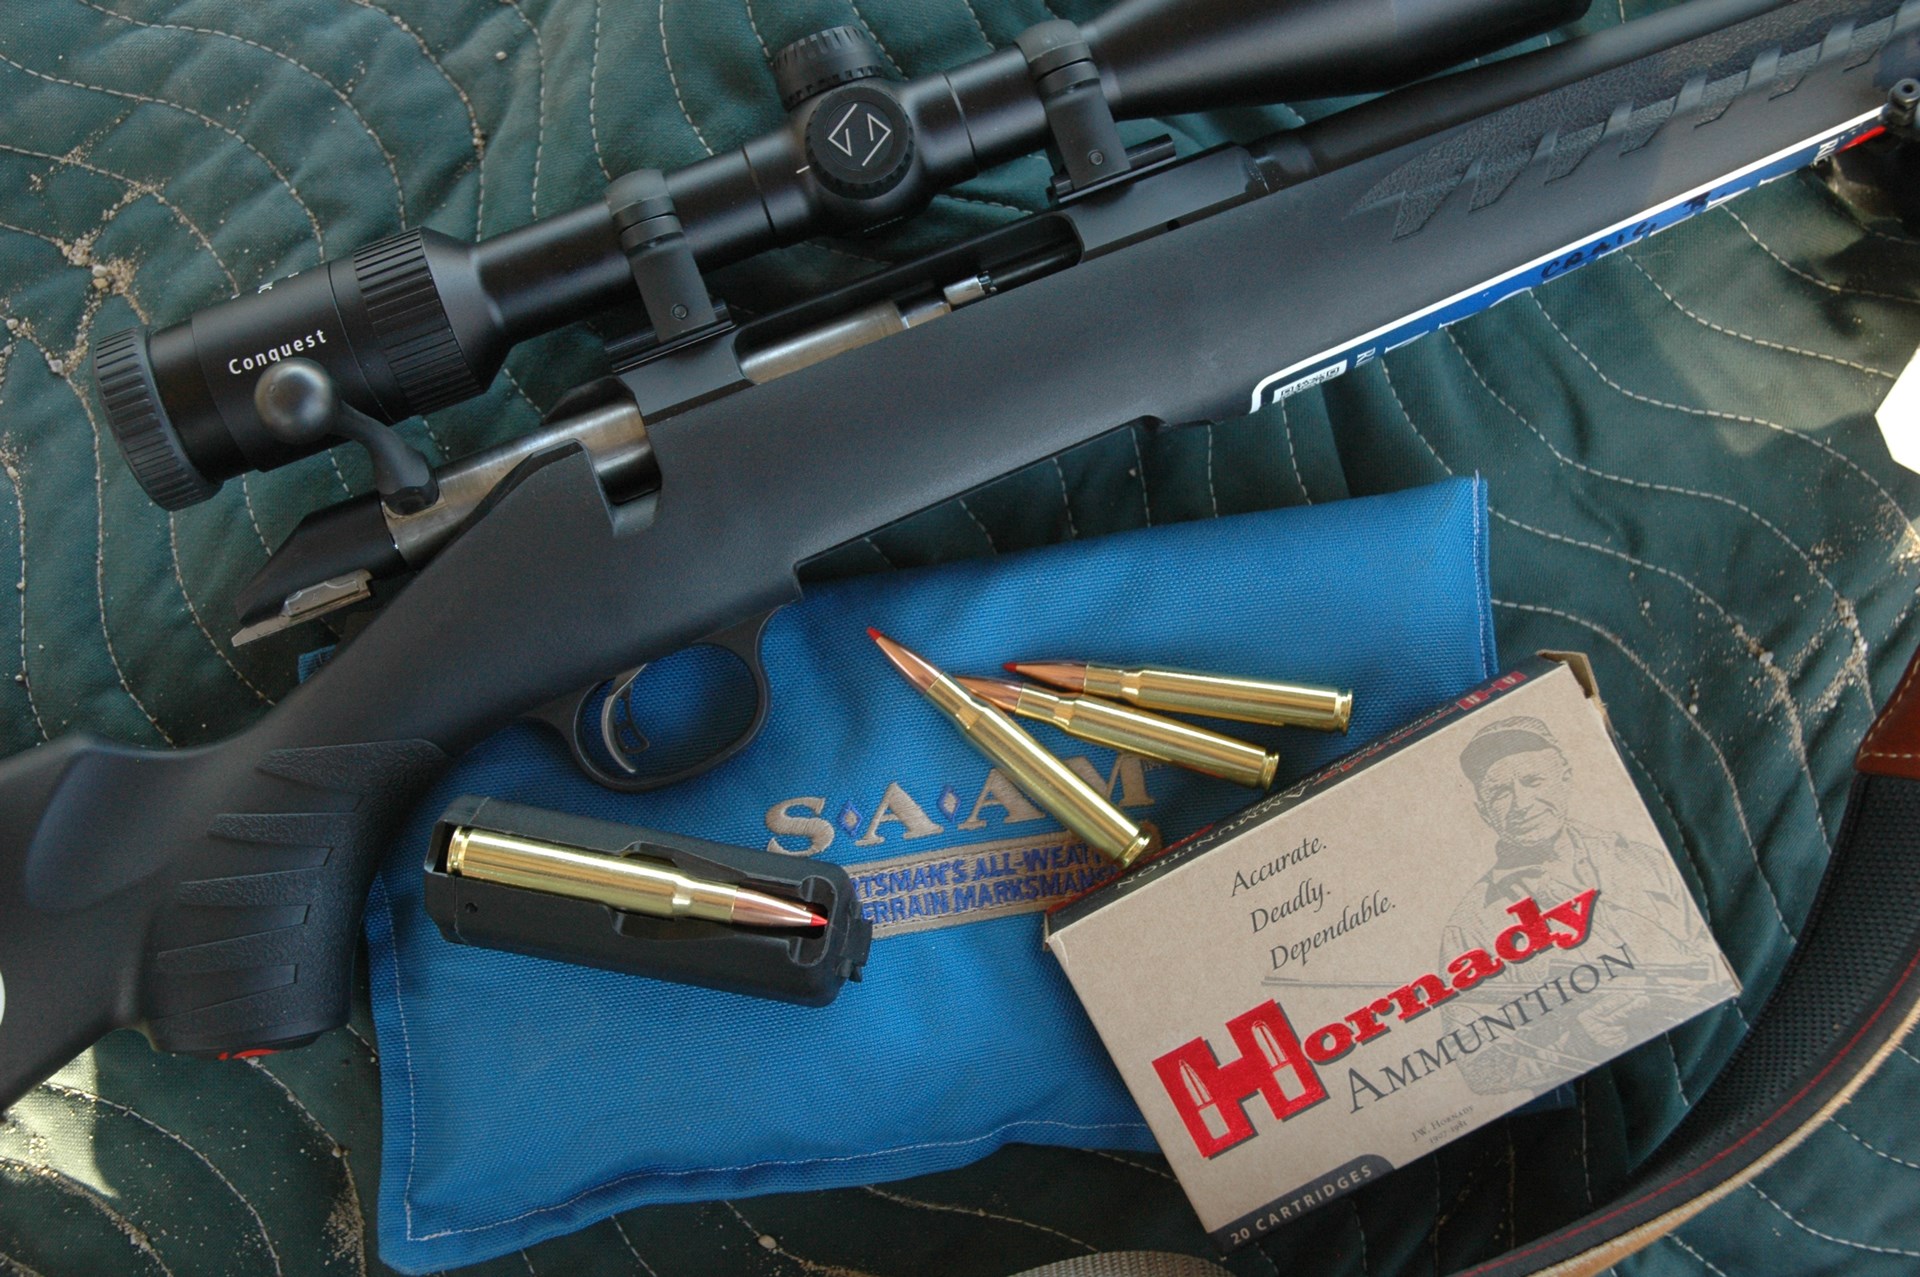 Introduced in 2011, the Ruger American was an unabashed—and very successful—effort to insert Ruger into the basic bolt gun market. First seen with a group of writers at the SAAM shooting school, the author and colleagues tested a dozen Ruger American rifles out to 1,000 yards with very little difficulty.